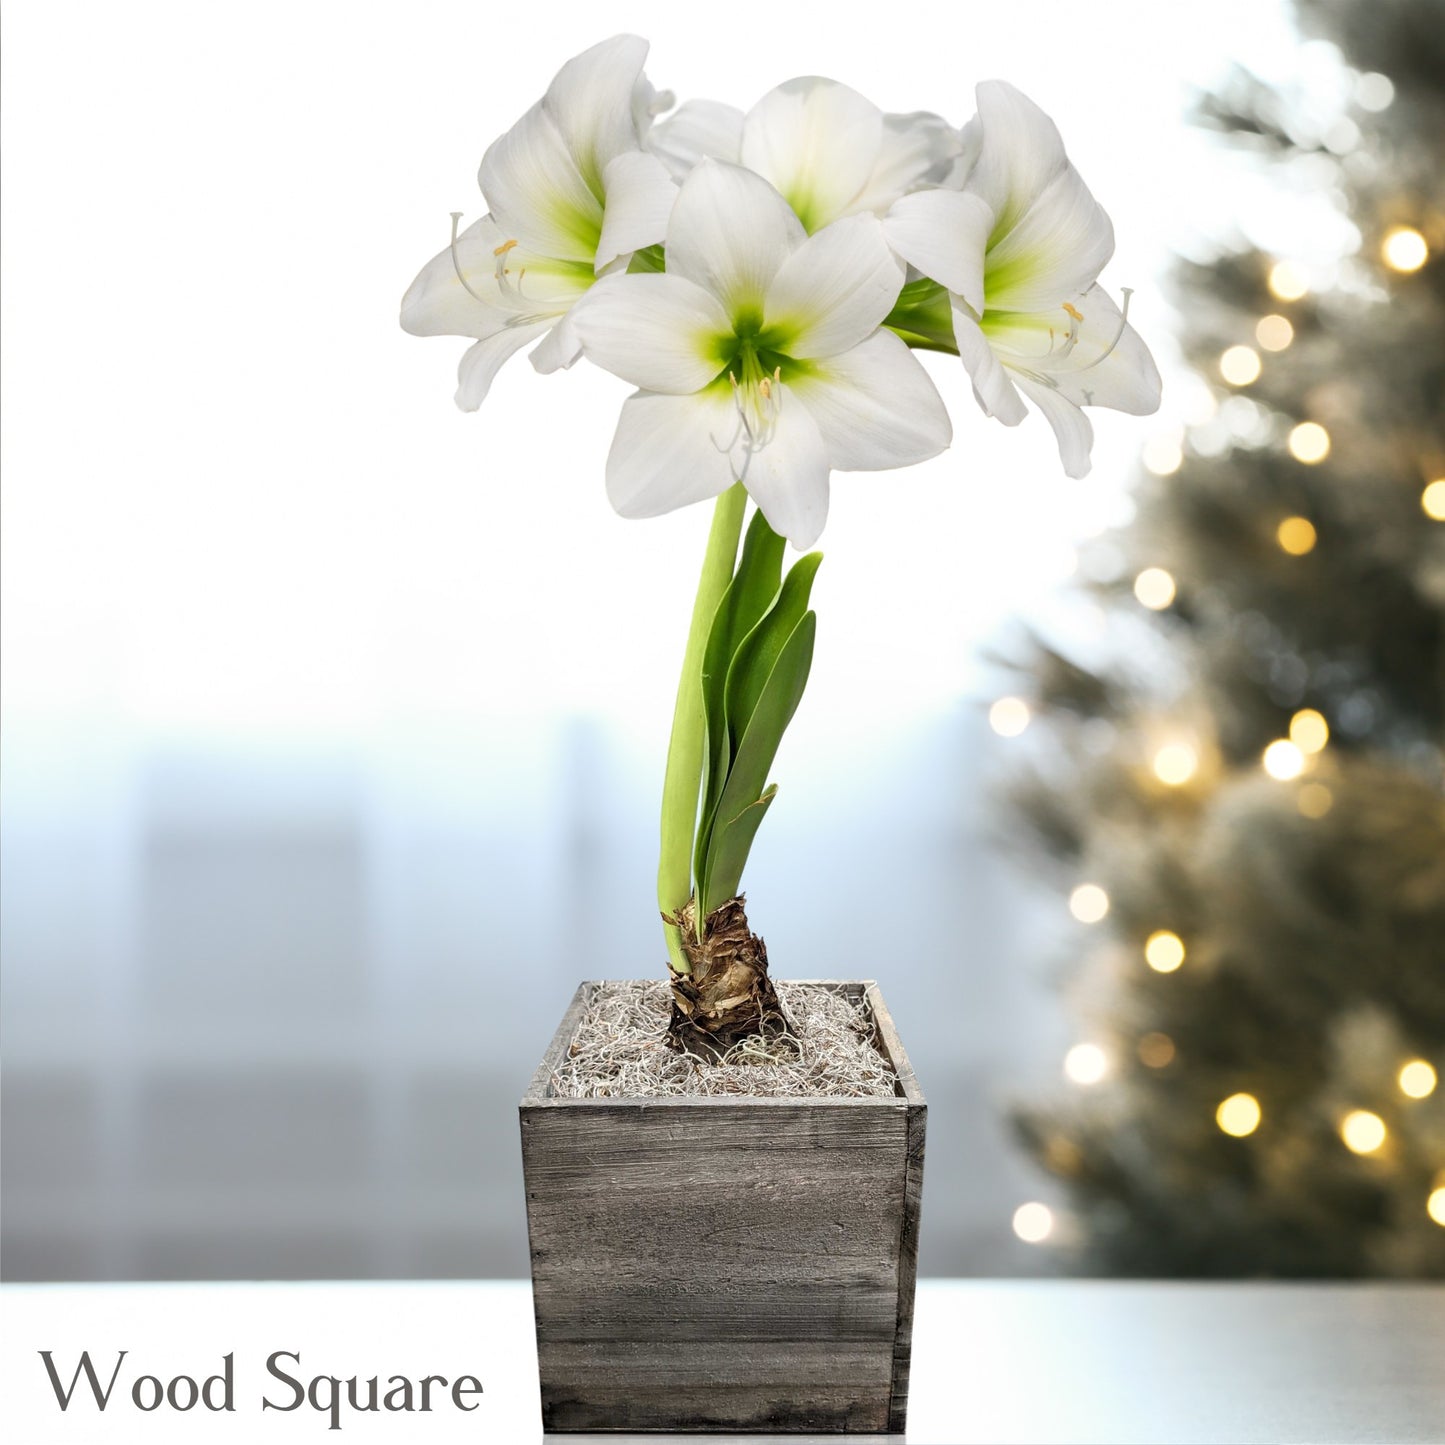 Amaryllis White Christmas blooming in a wood square planter